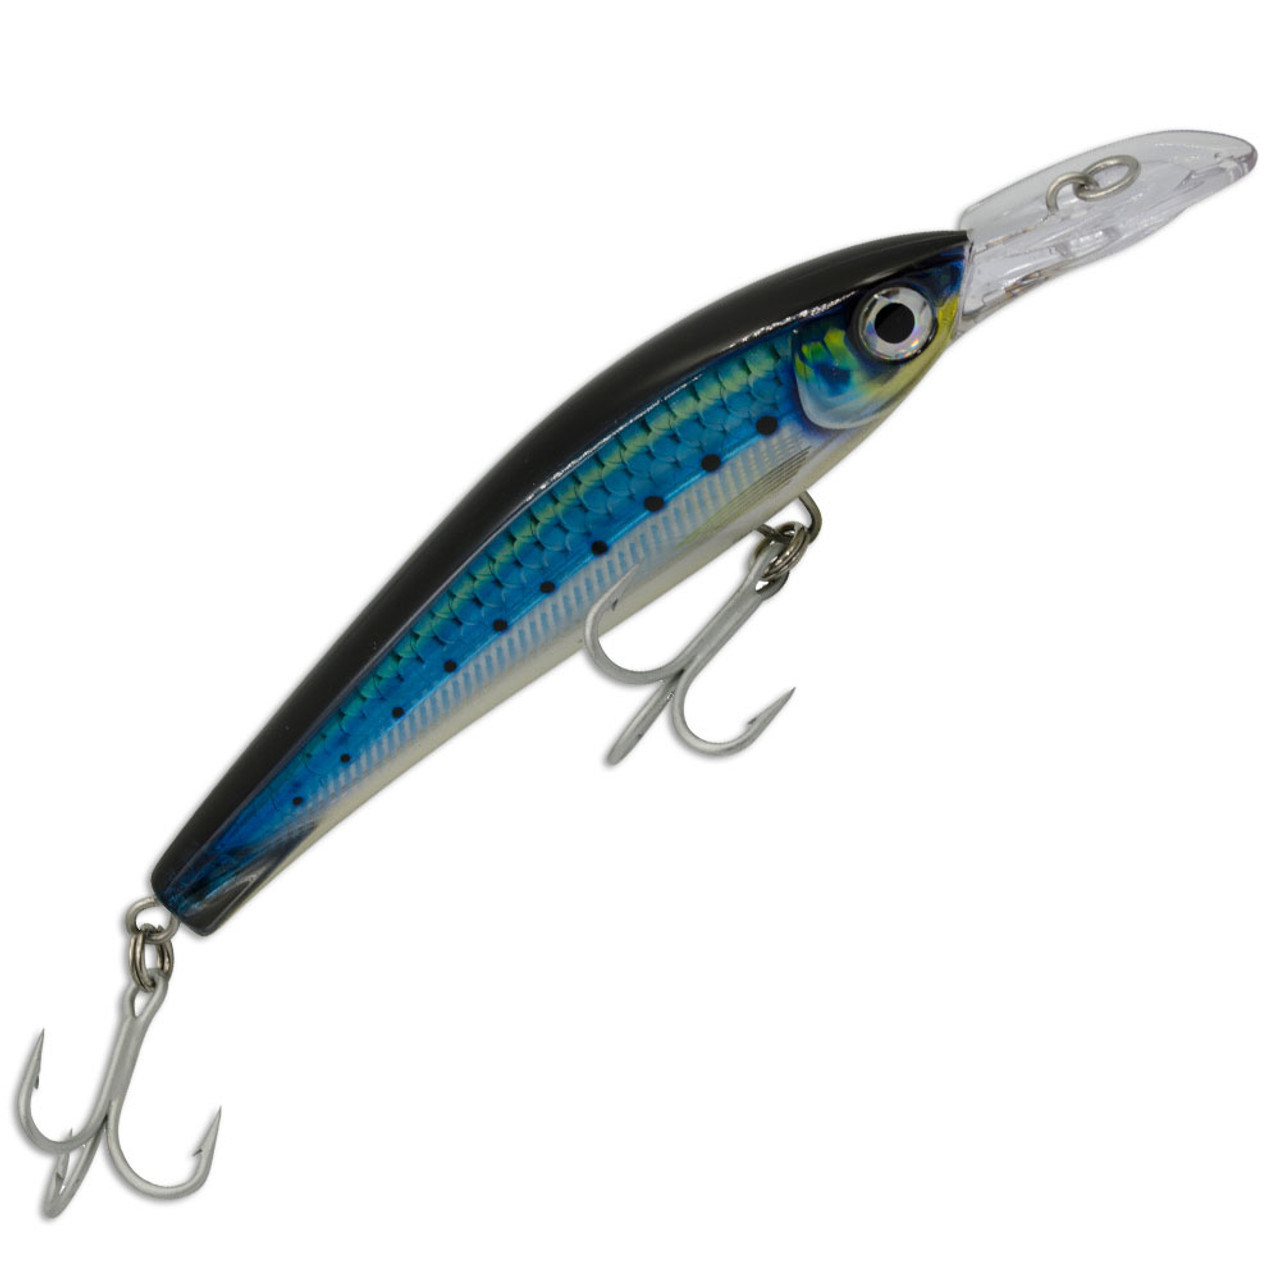 https://cdn11.bigcommerce.com/s-55834/images/stencil/1280x1280/products/4788/14128/rapala-xtreme-lure-xrap-160__12952.1550953678.jpg?c=2